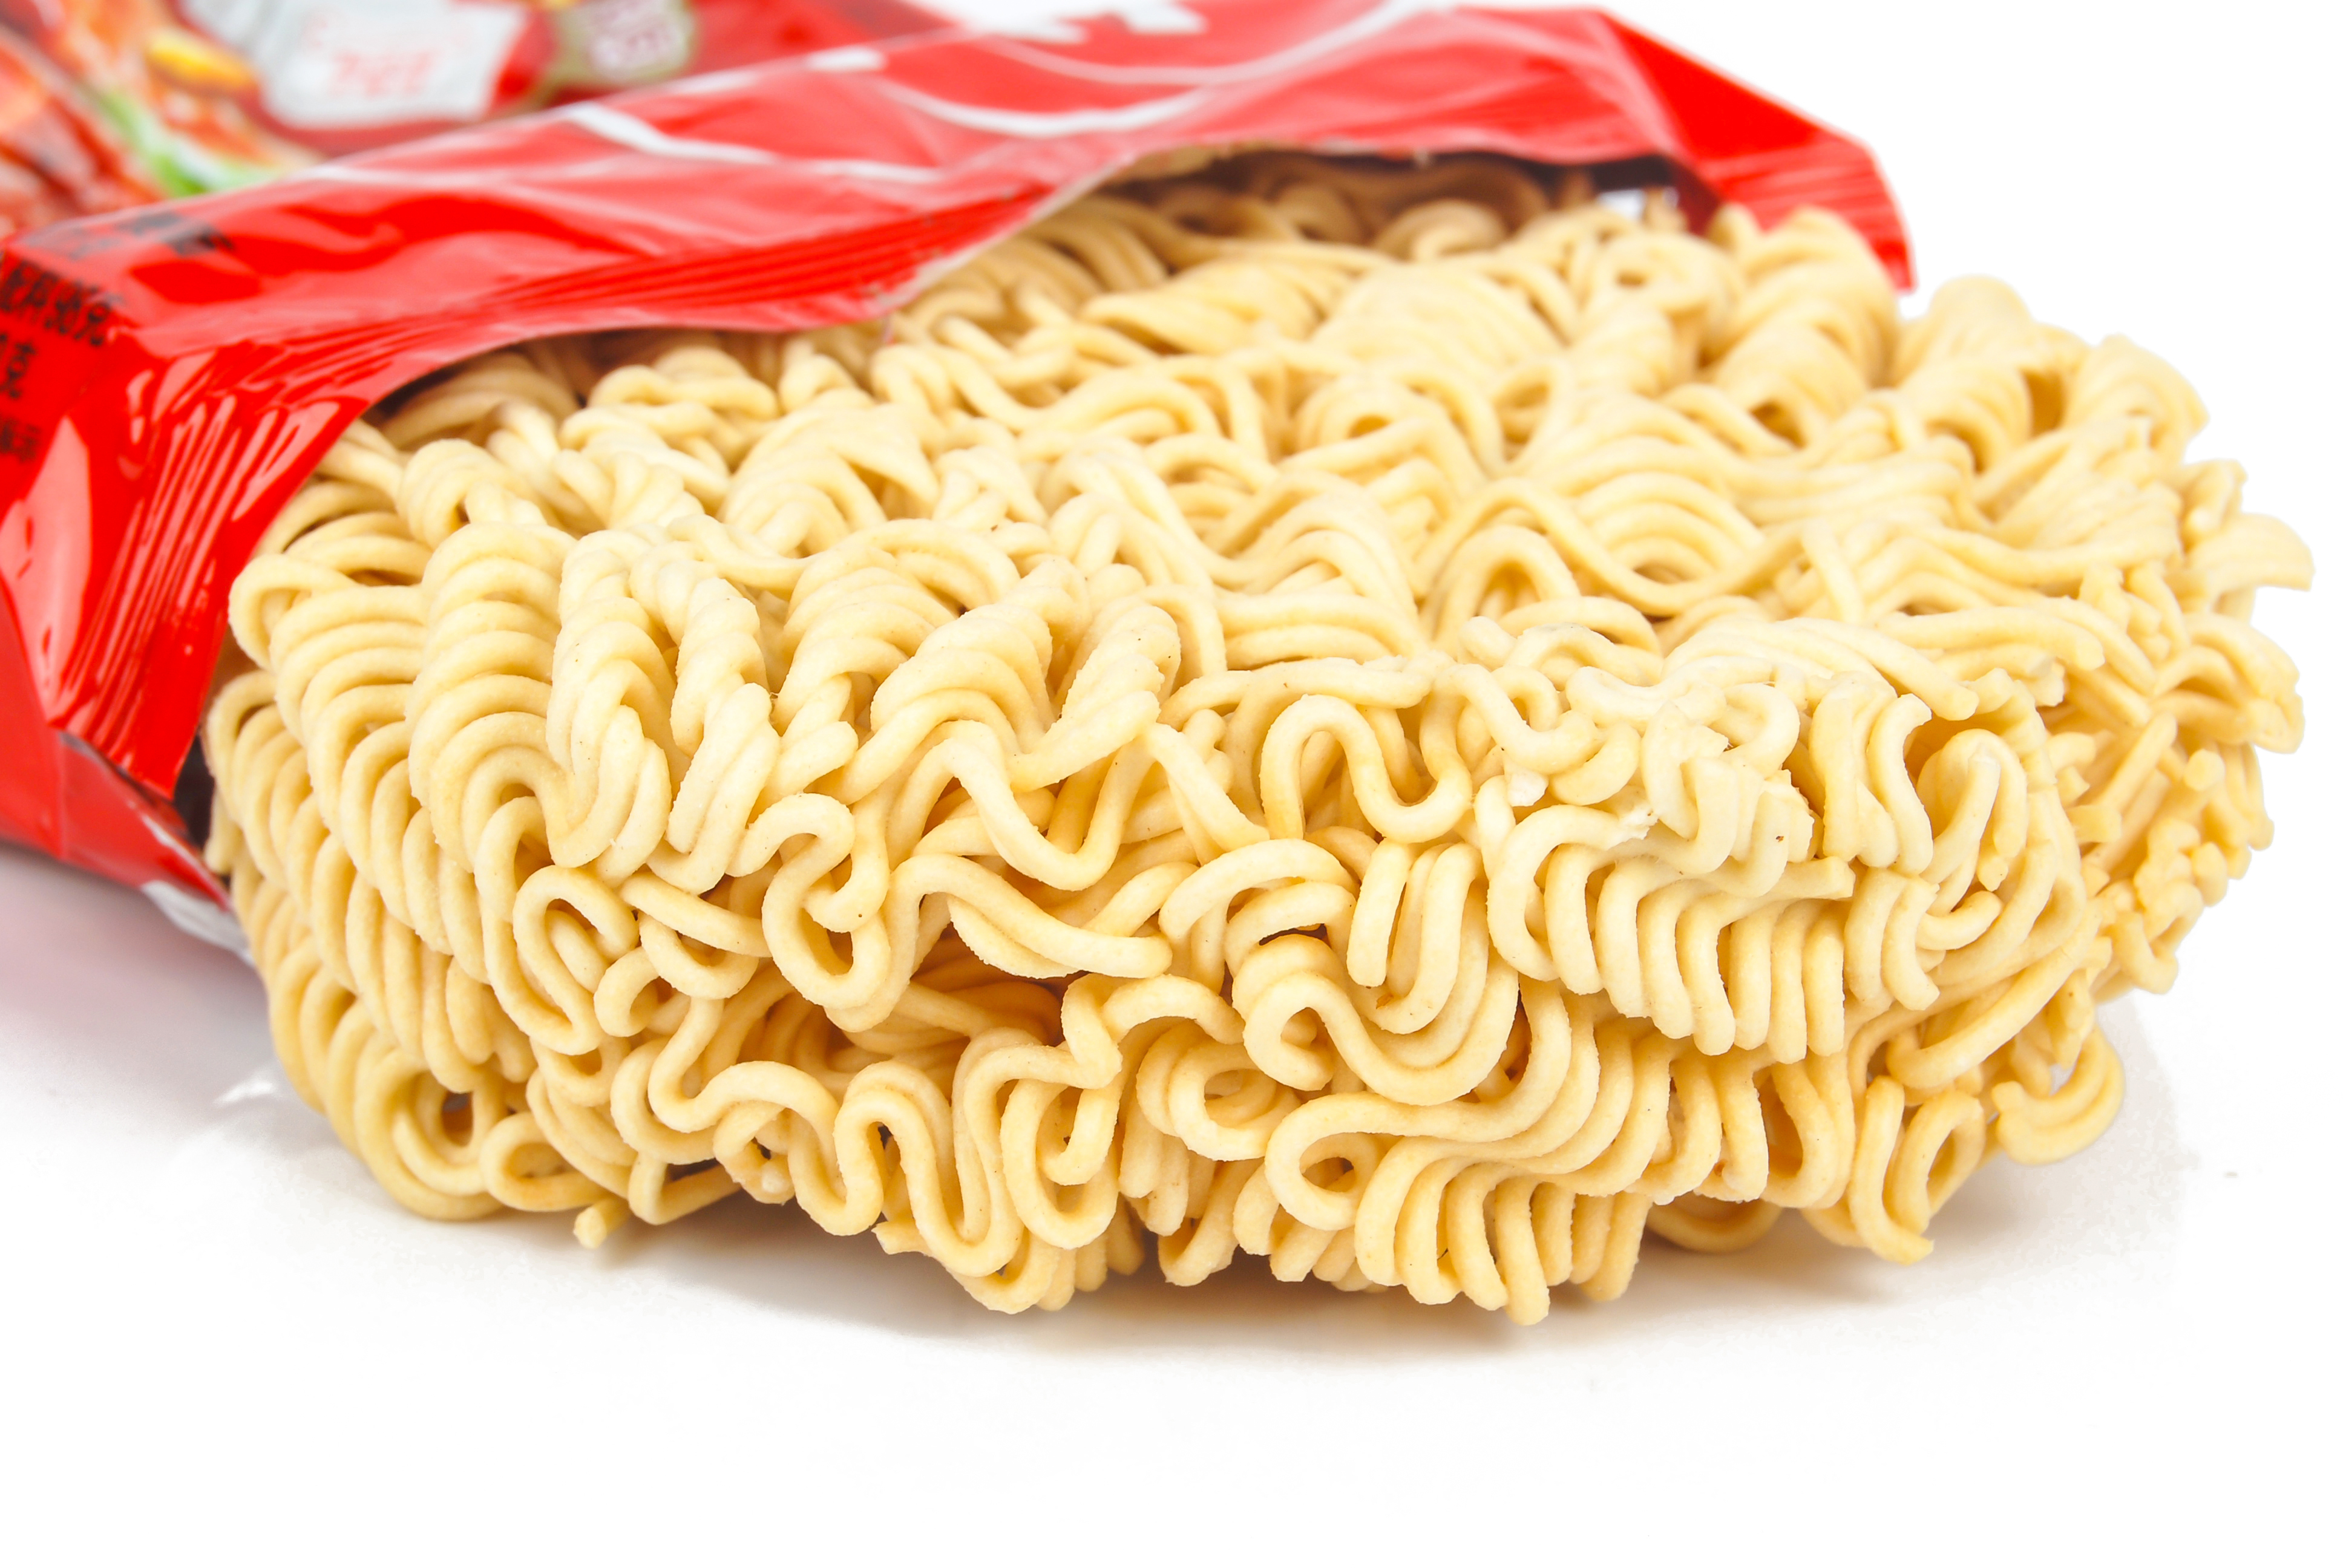 Global instant noodles market was valued at 30.74 billion US$ in 2018 and is projected to reach 31.52 billion US$ by 2024